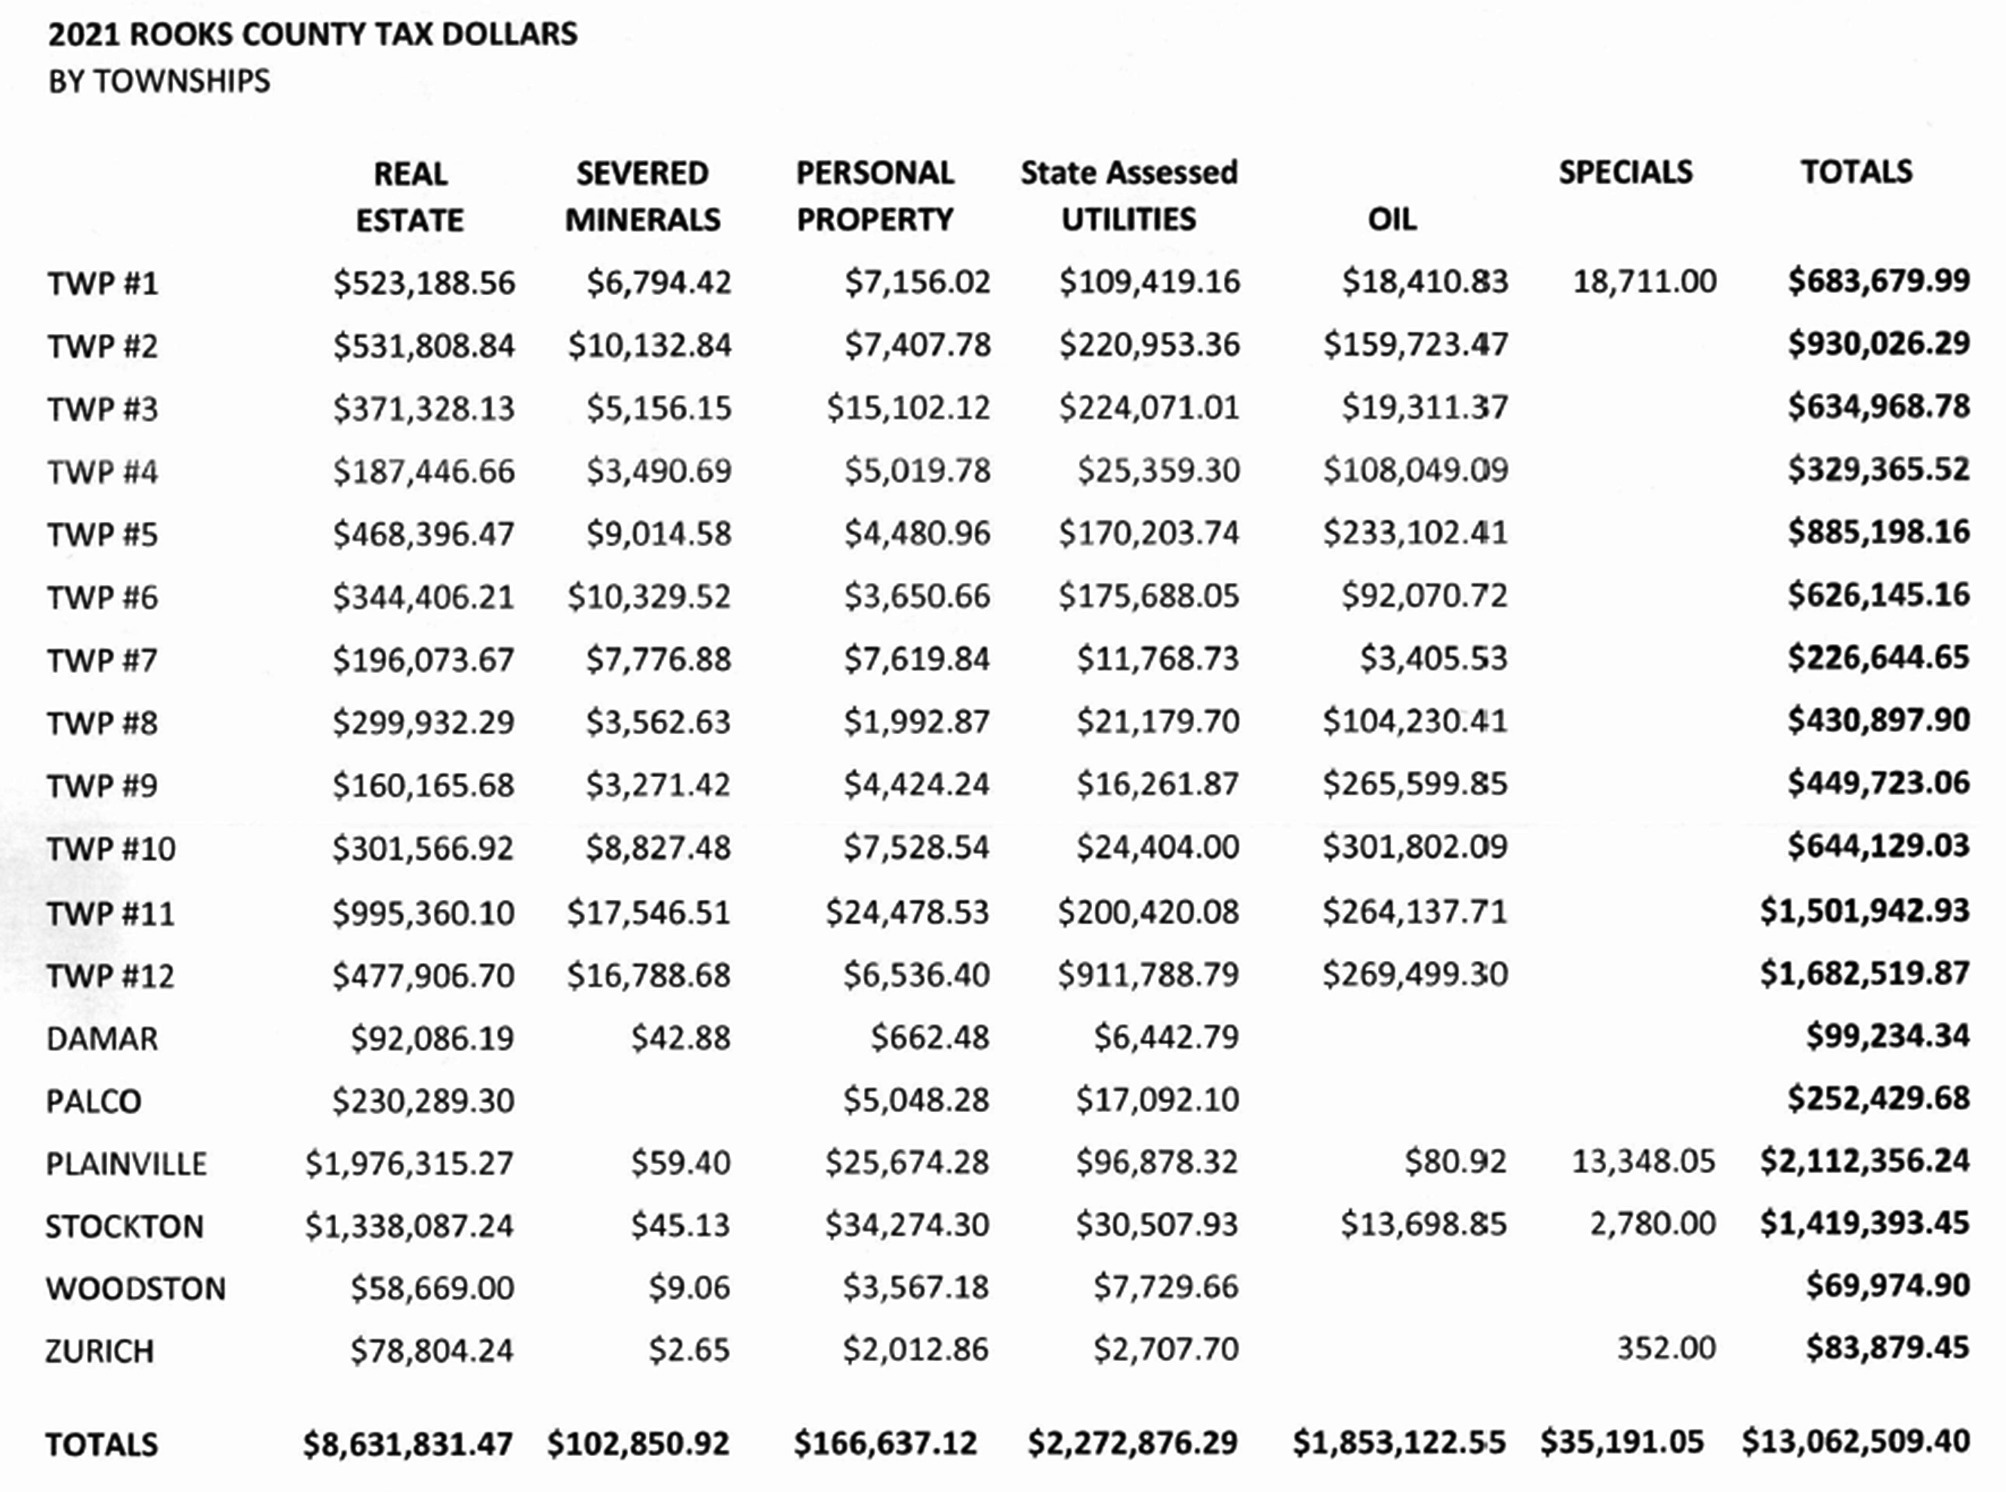 County tax revenues up $990,396.26 from 2021